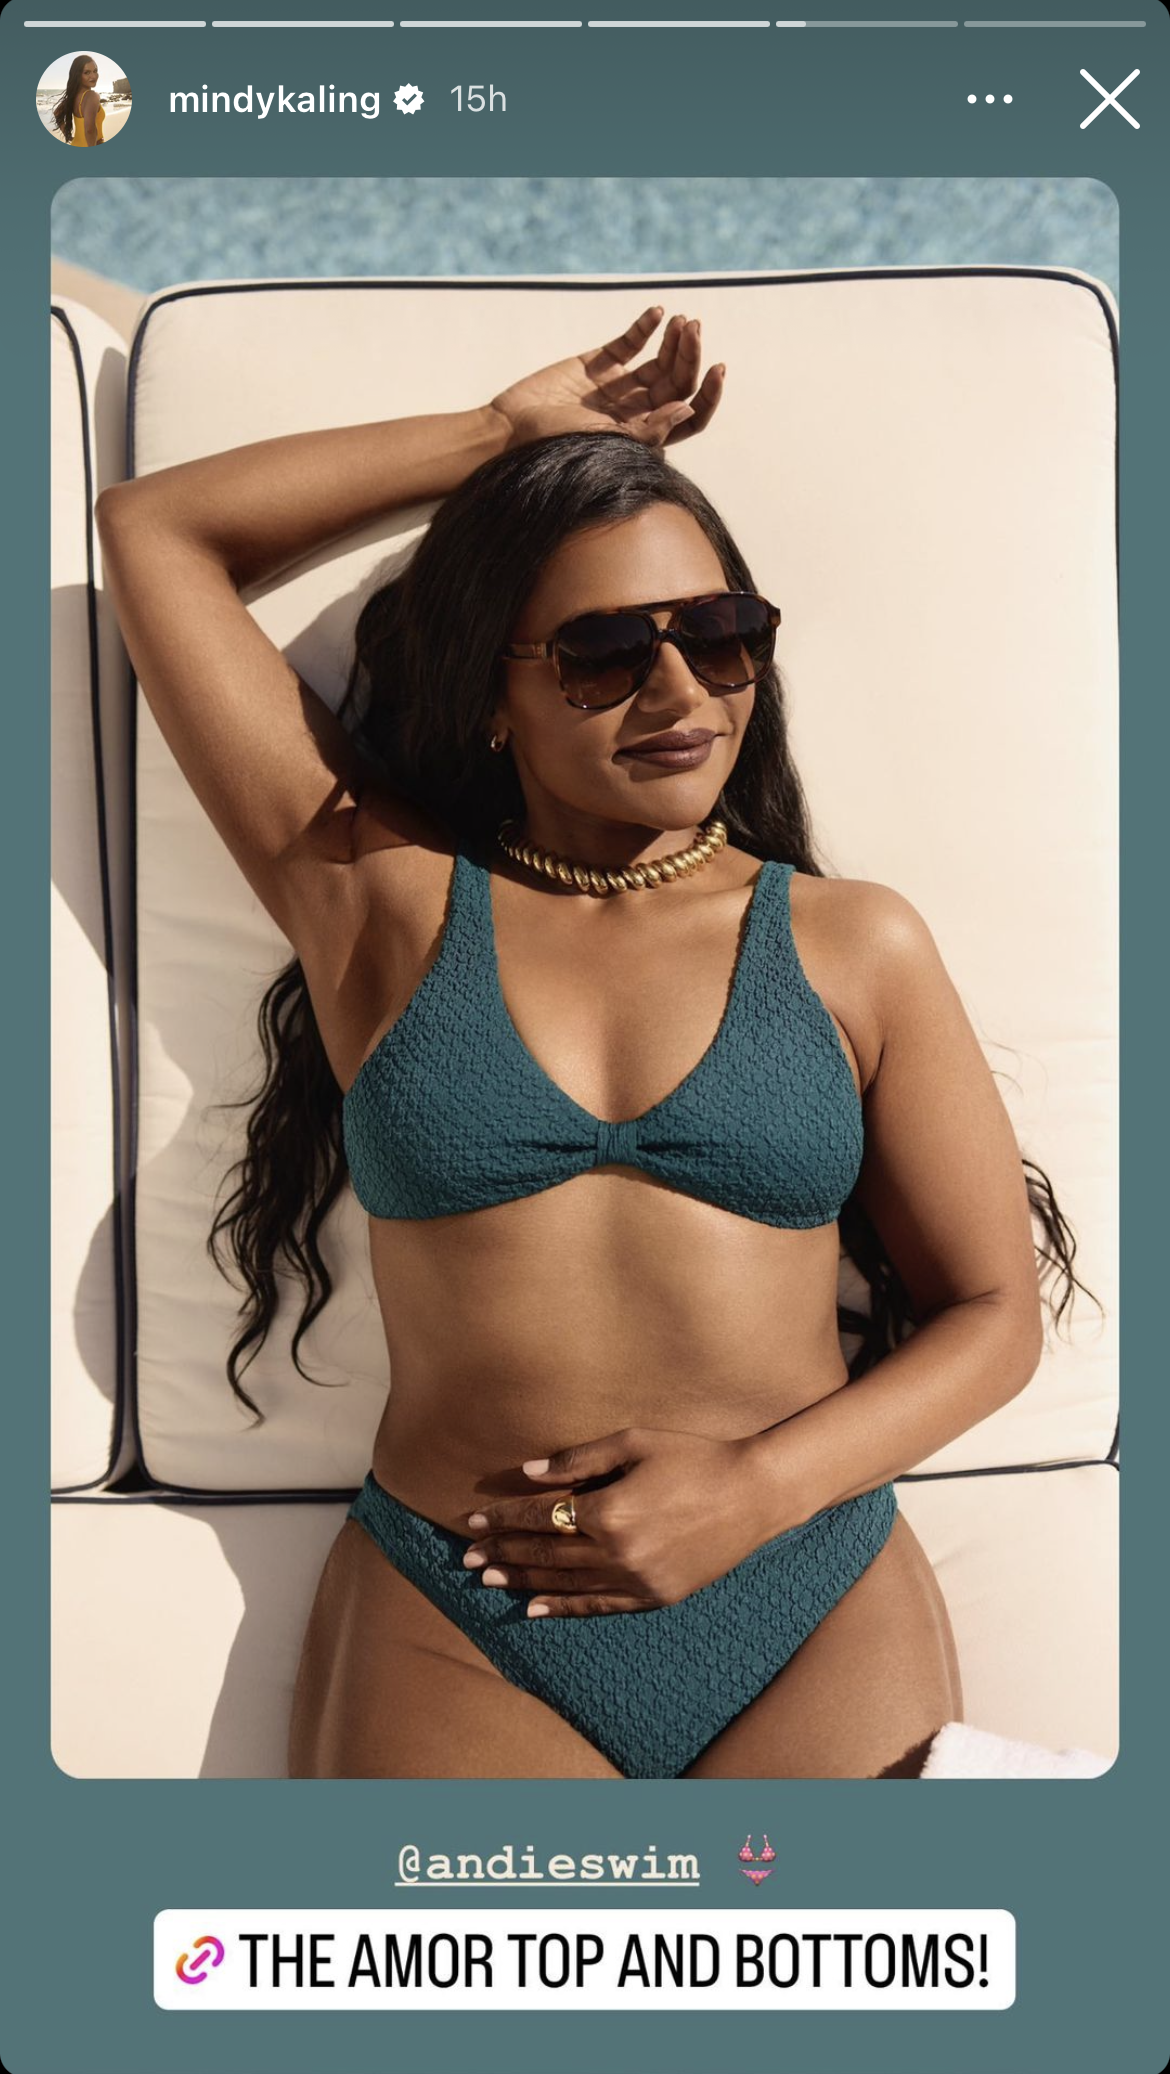 dianne coyne recommends mindy kaling butt pic